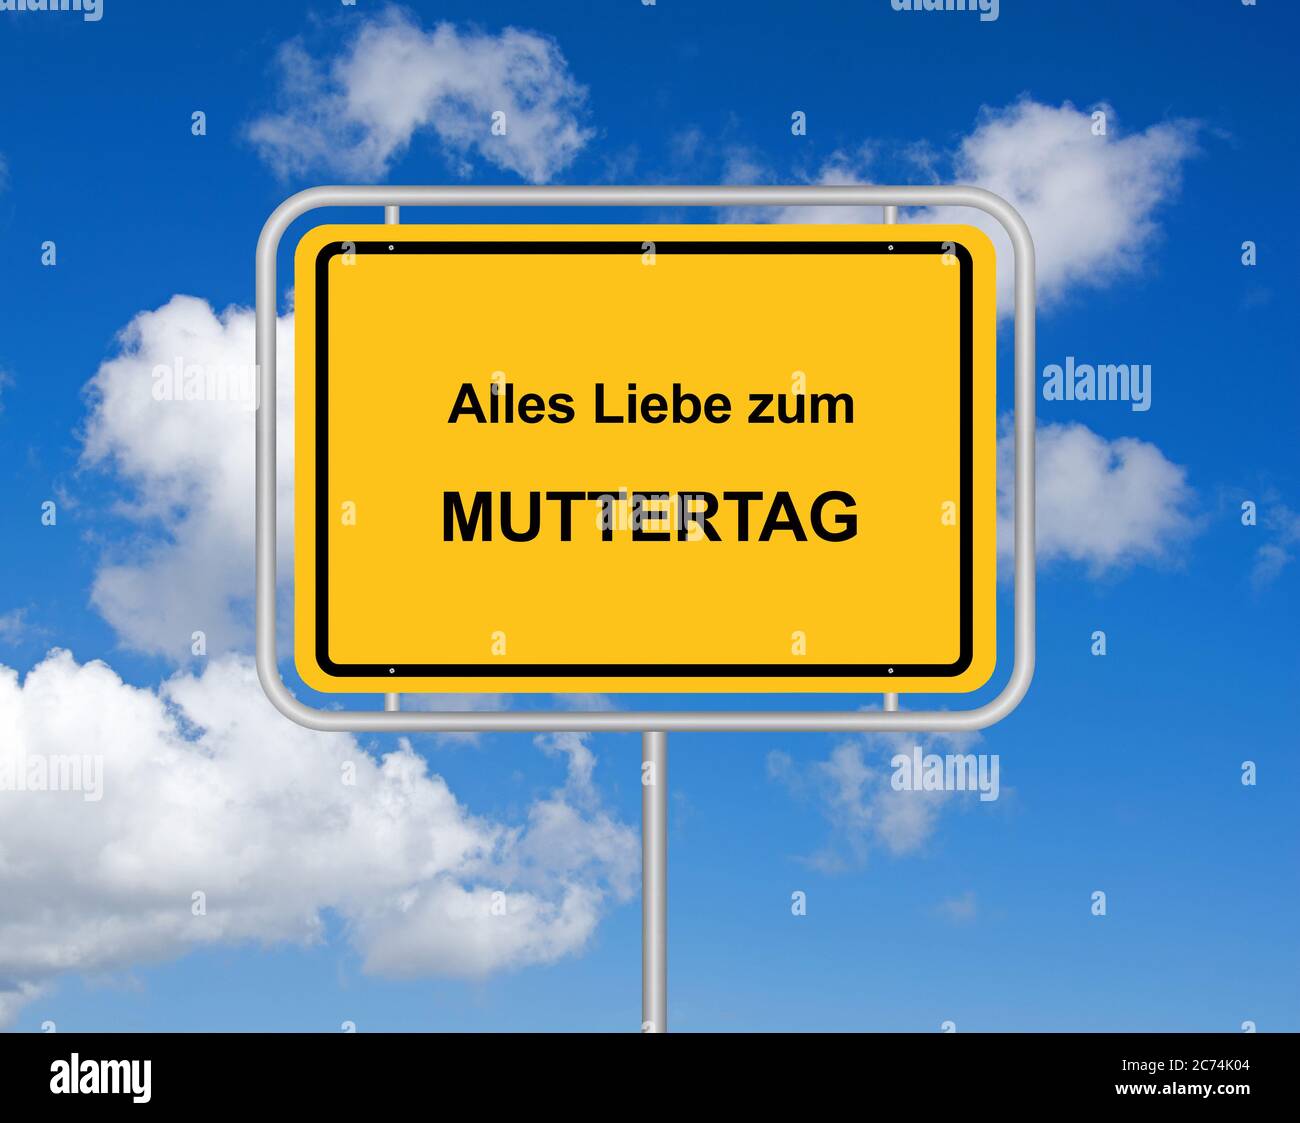 city limit sign lettering Alles Liebe zum Muttertag, best wishes for mother's day, Germany Stock Photo